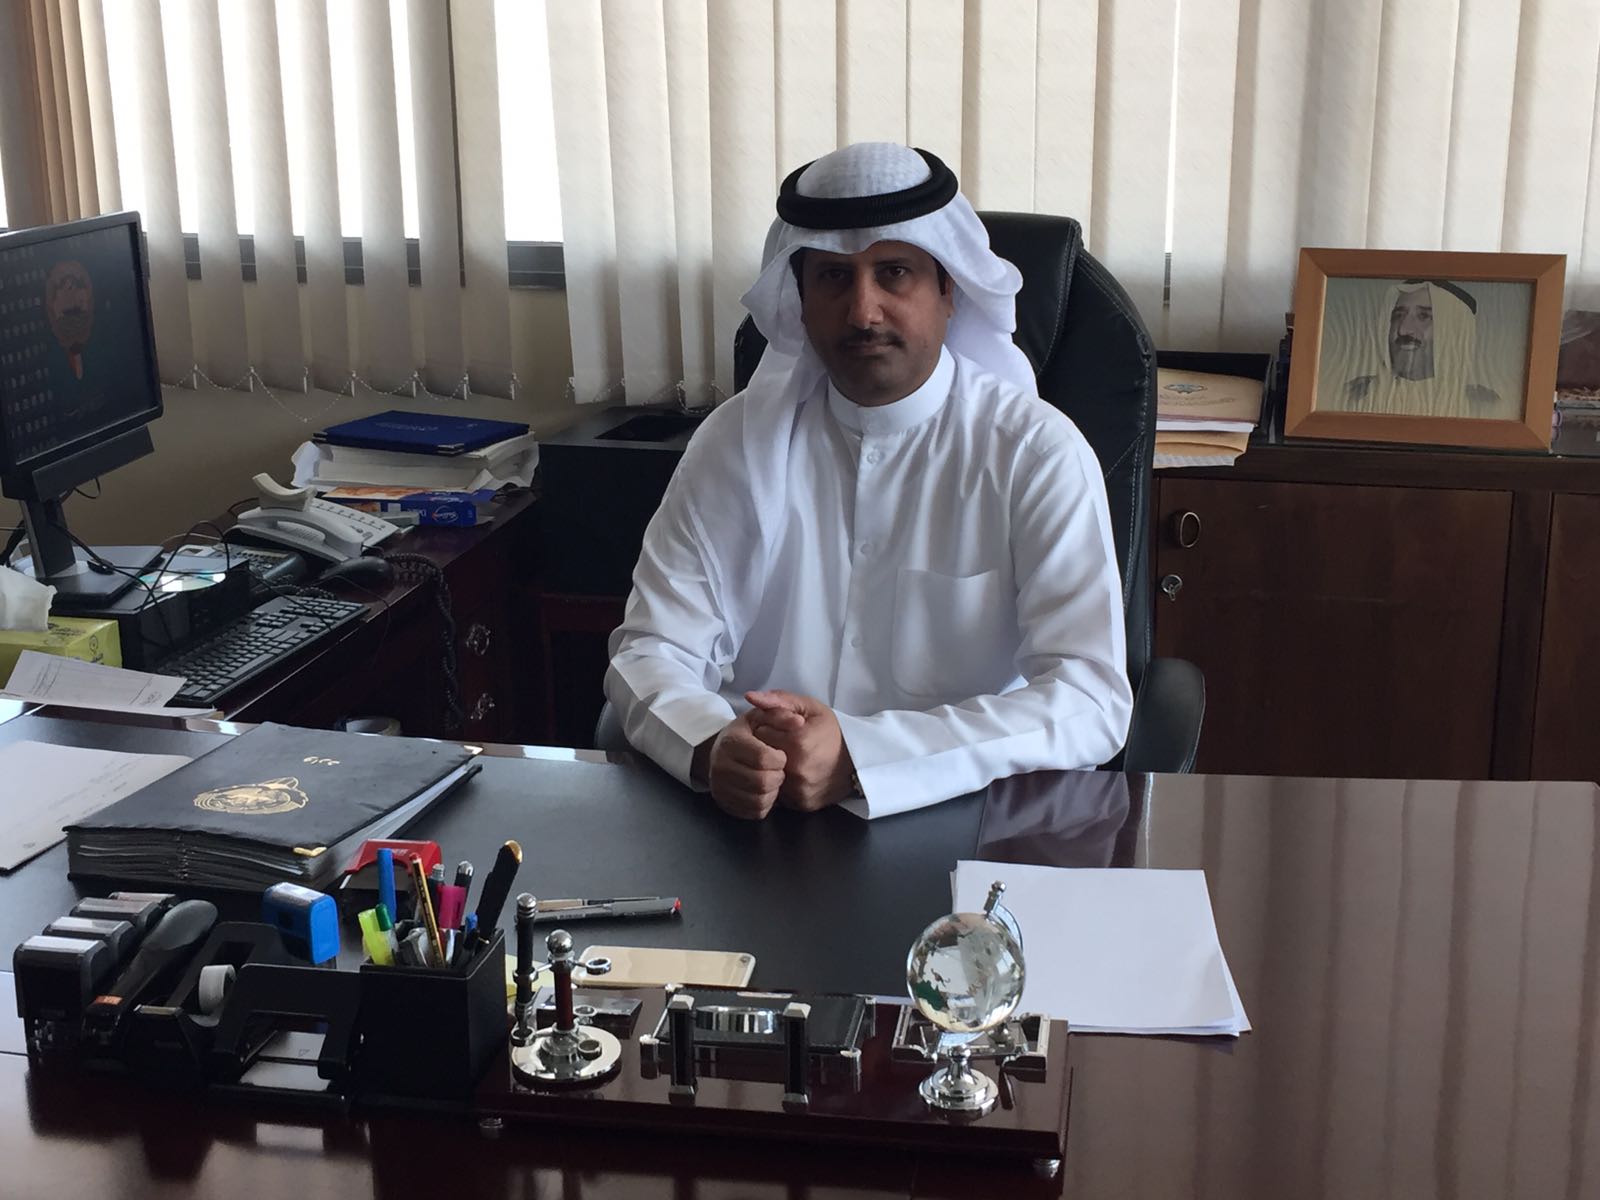 acting director of school libraries department in the Ministry of Education, Ahmed Al-Majidi,